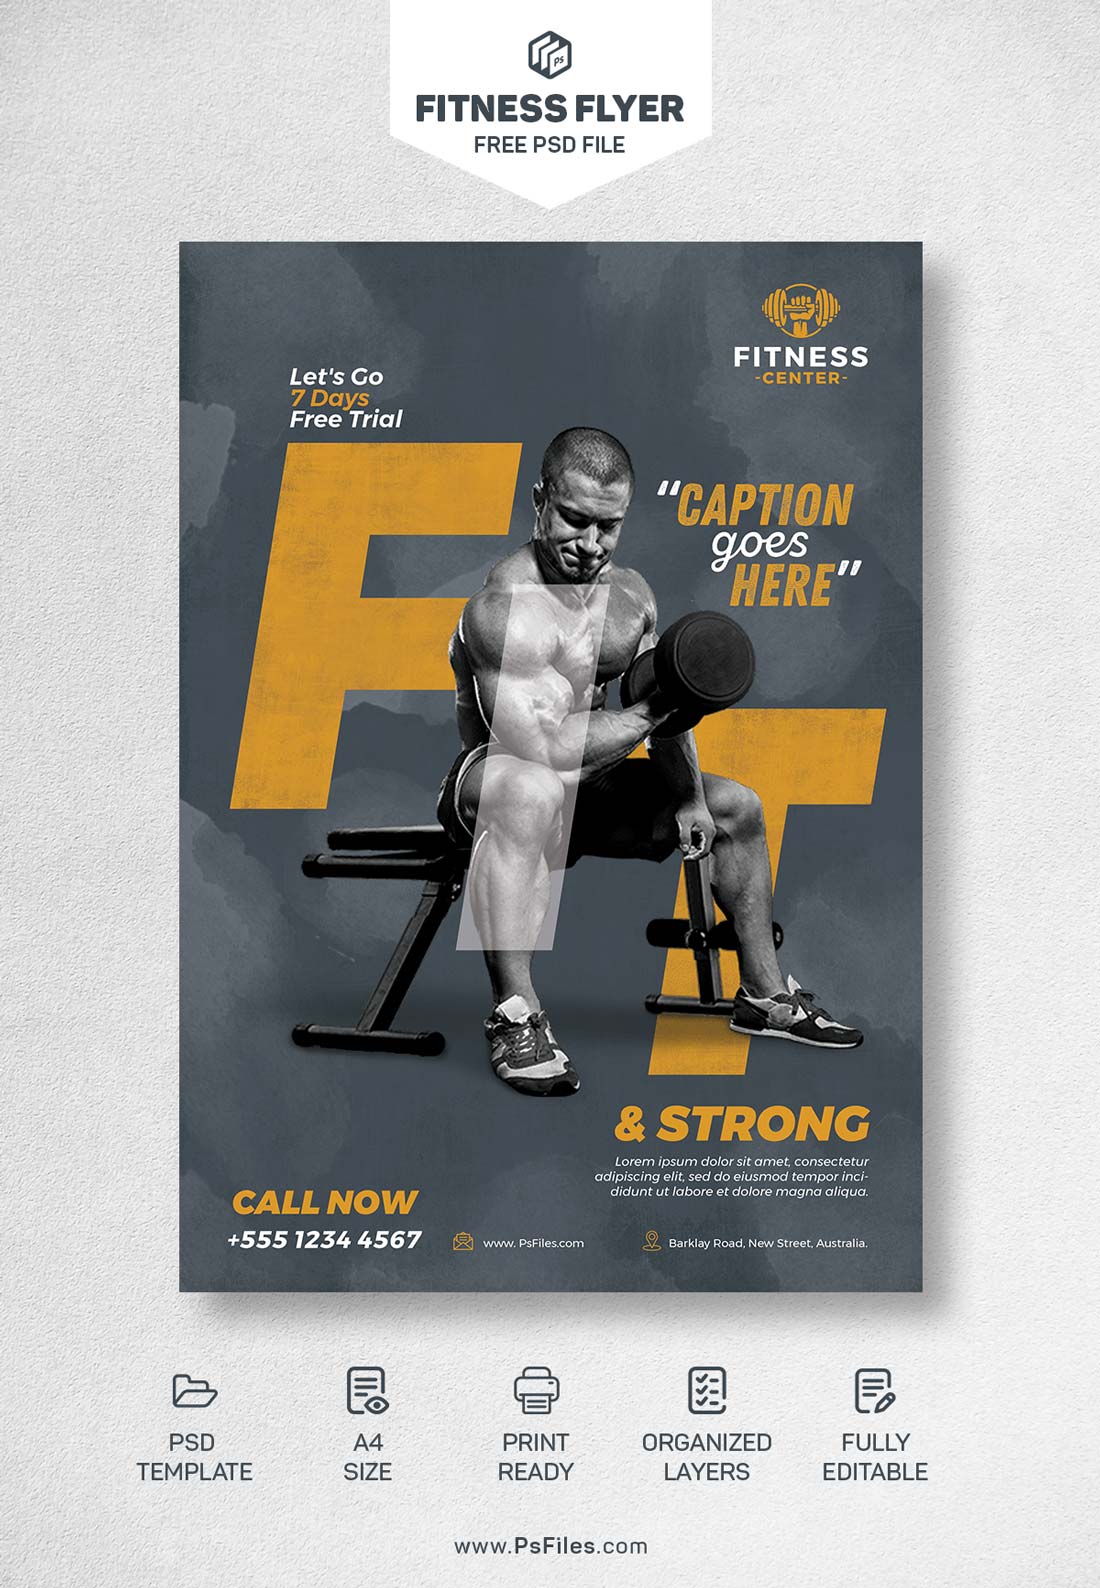 Fit and Strong Body Builder Poster Design PSD Template